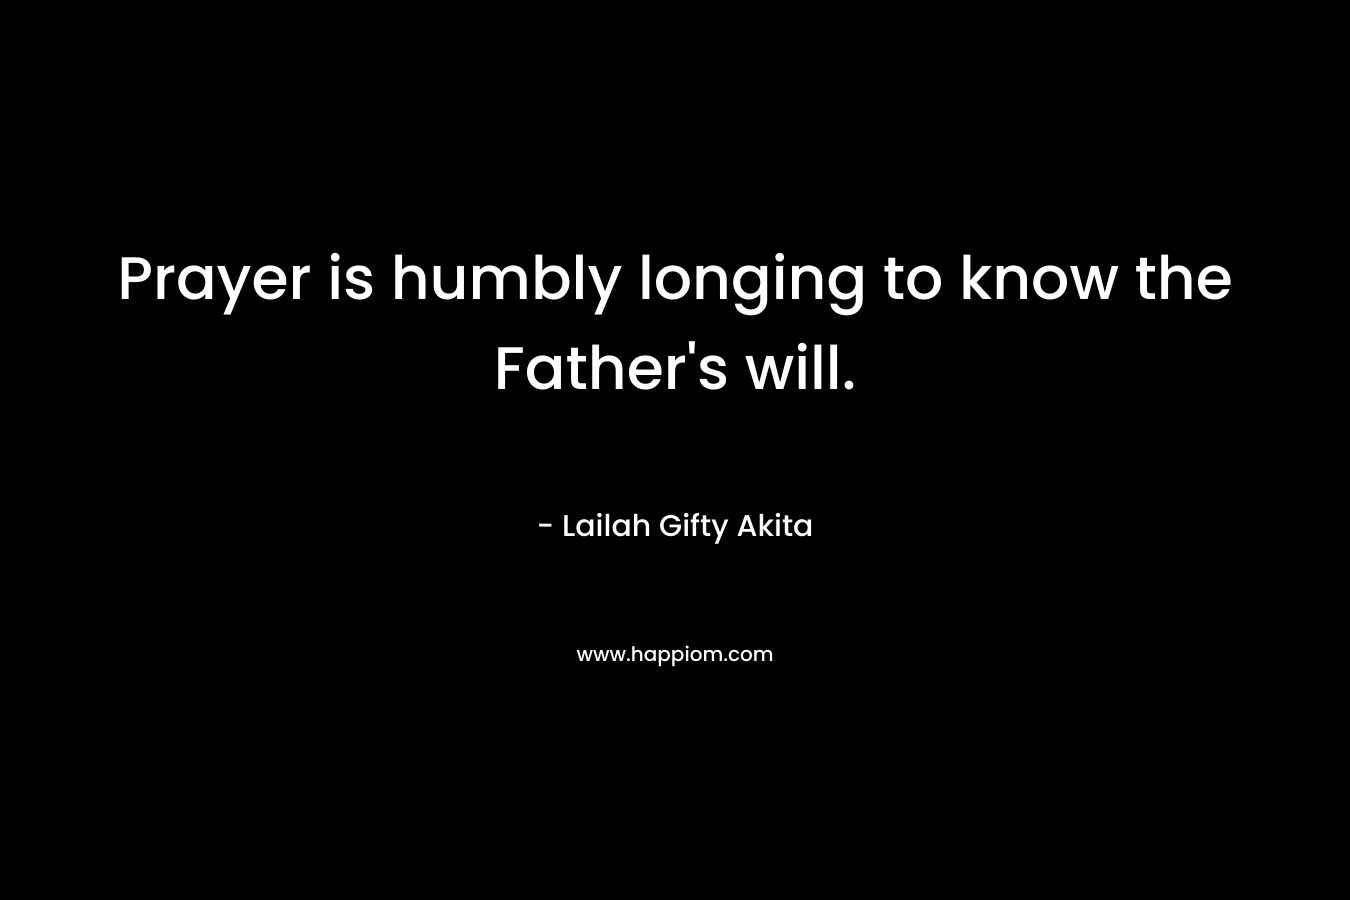 Prayer is humbly longing to know the Father’s will. – Lailah Gifty Akita